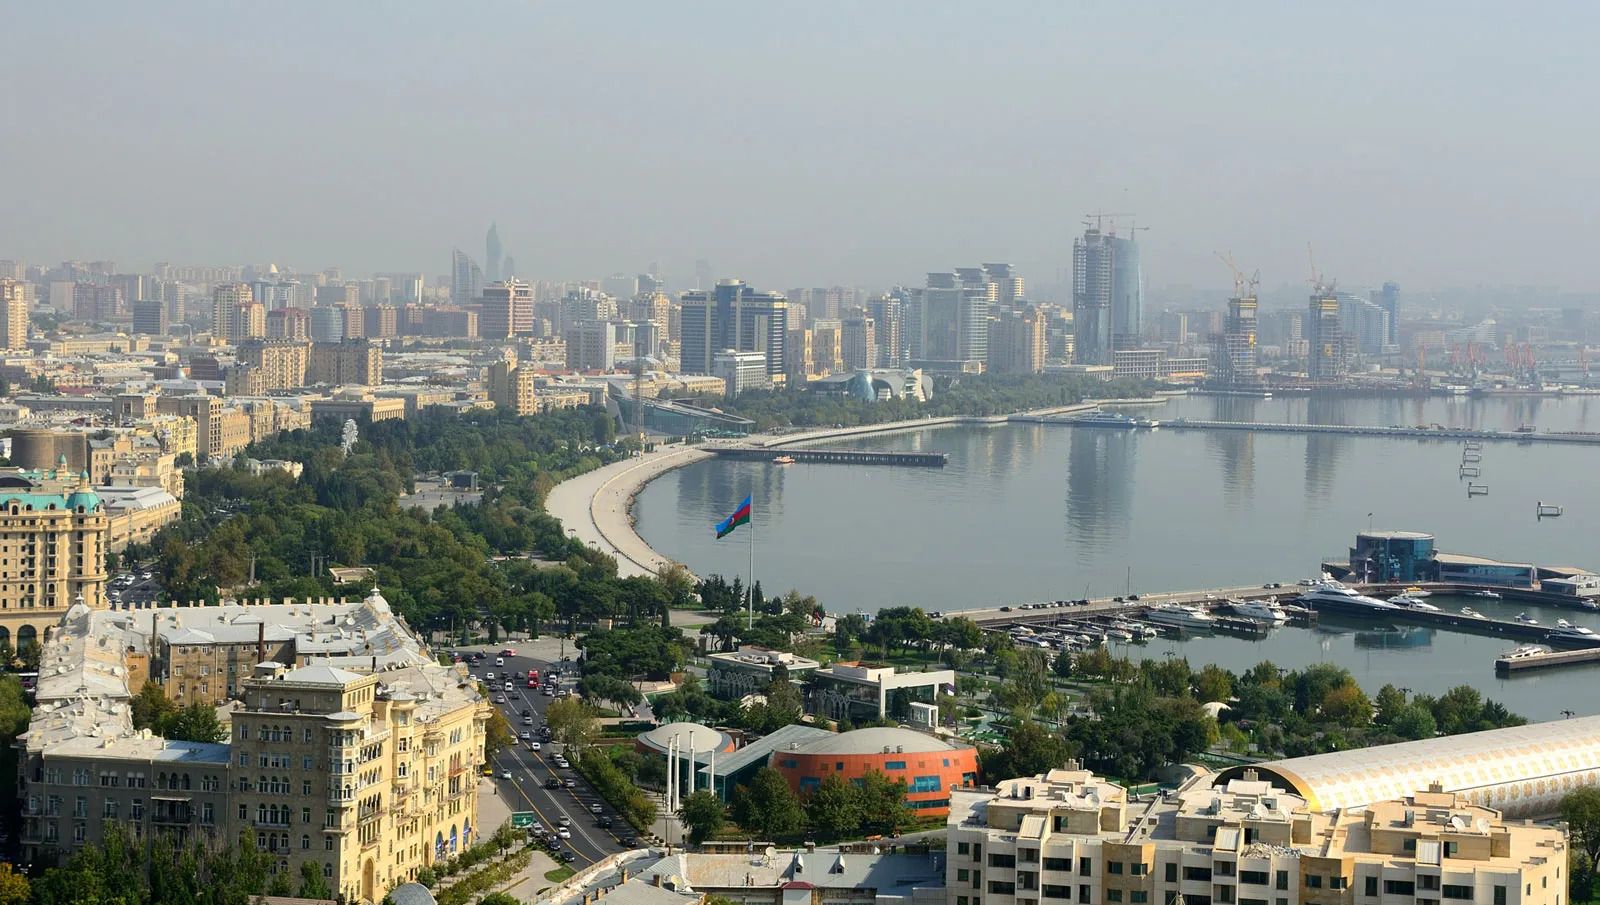 Baku nominated to become sports capital of world in 2026